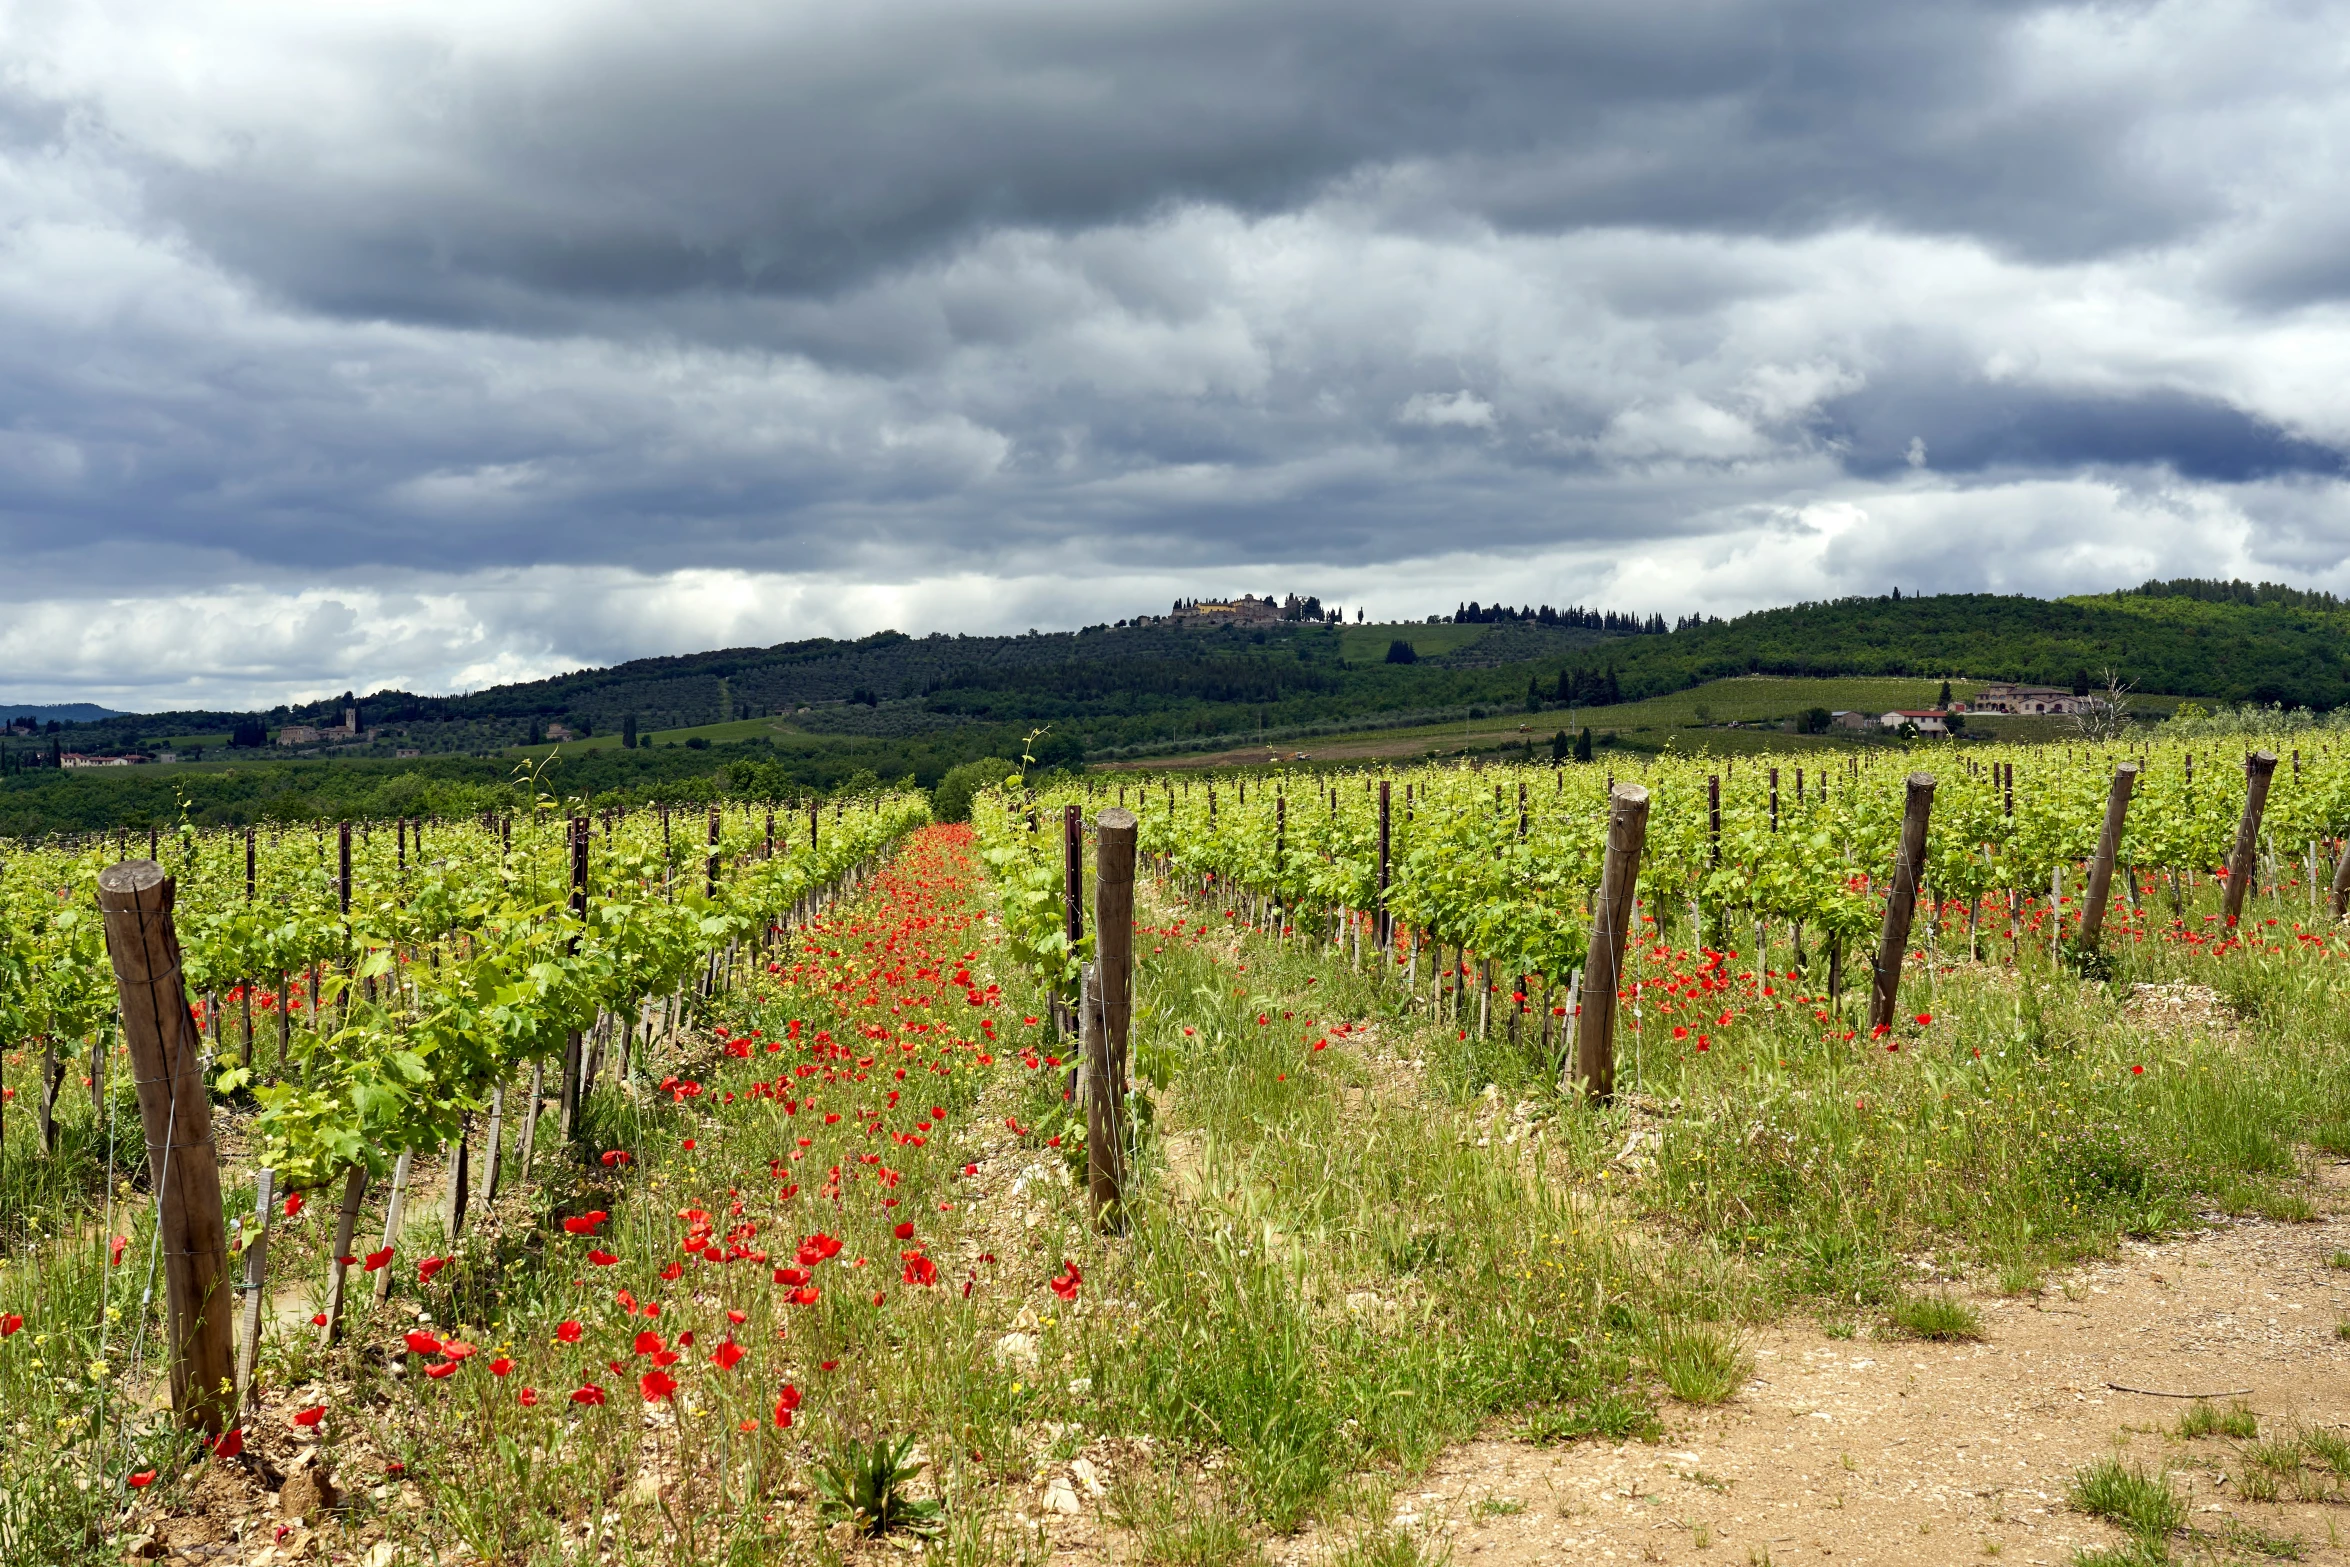 the beautiful wine fields with bright red flowers are dotted by green grass